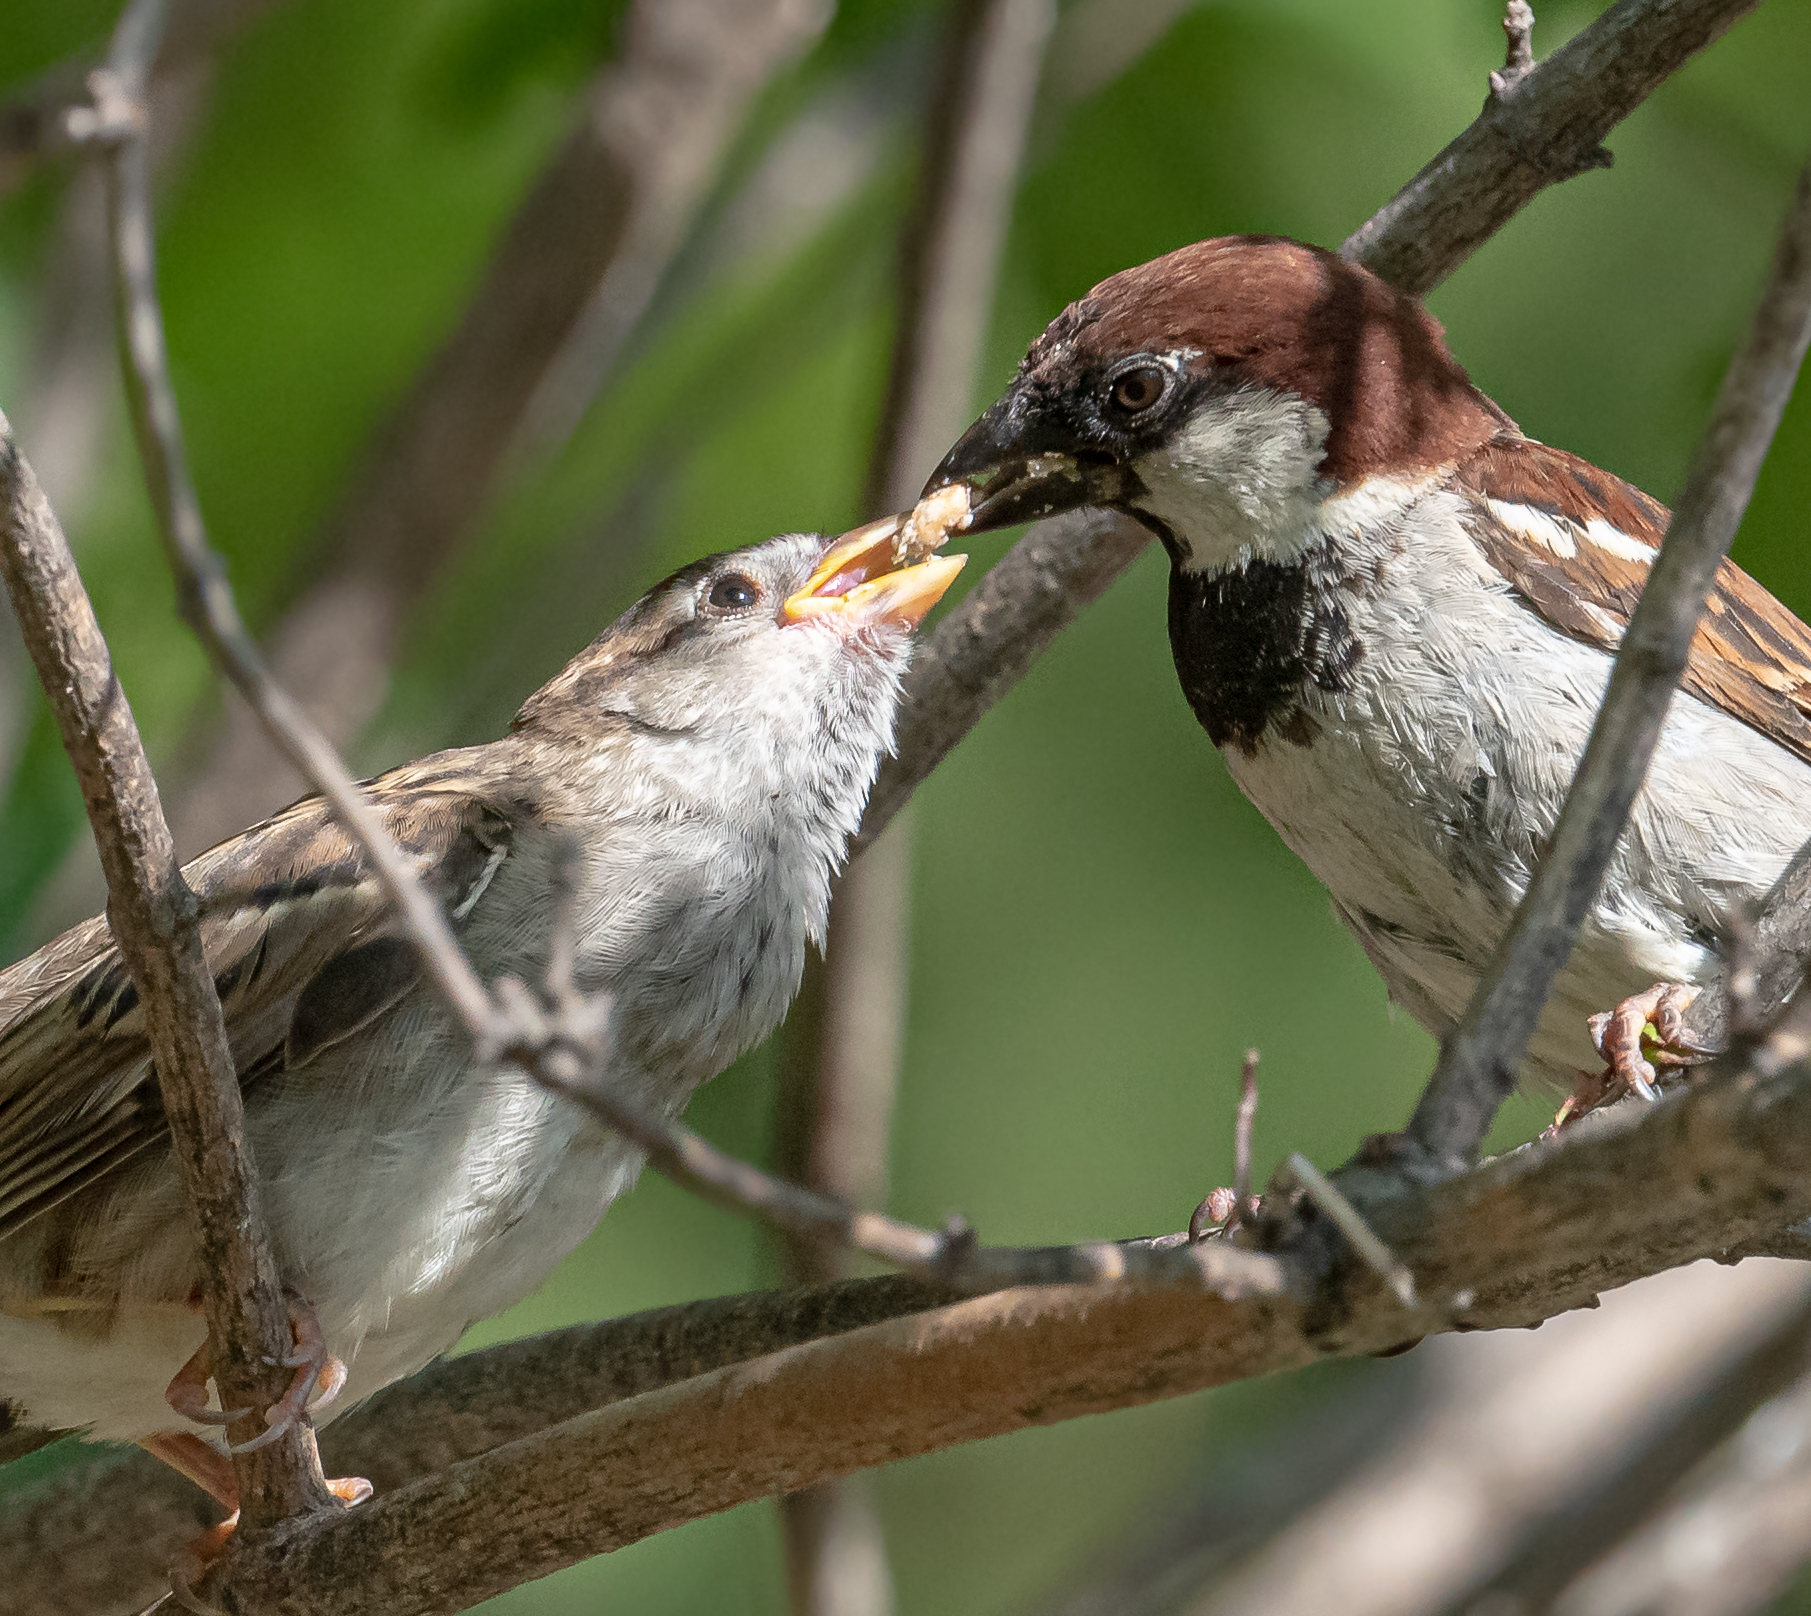 Family breakfast of sparrows...